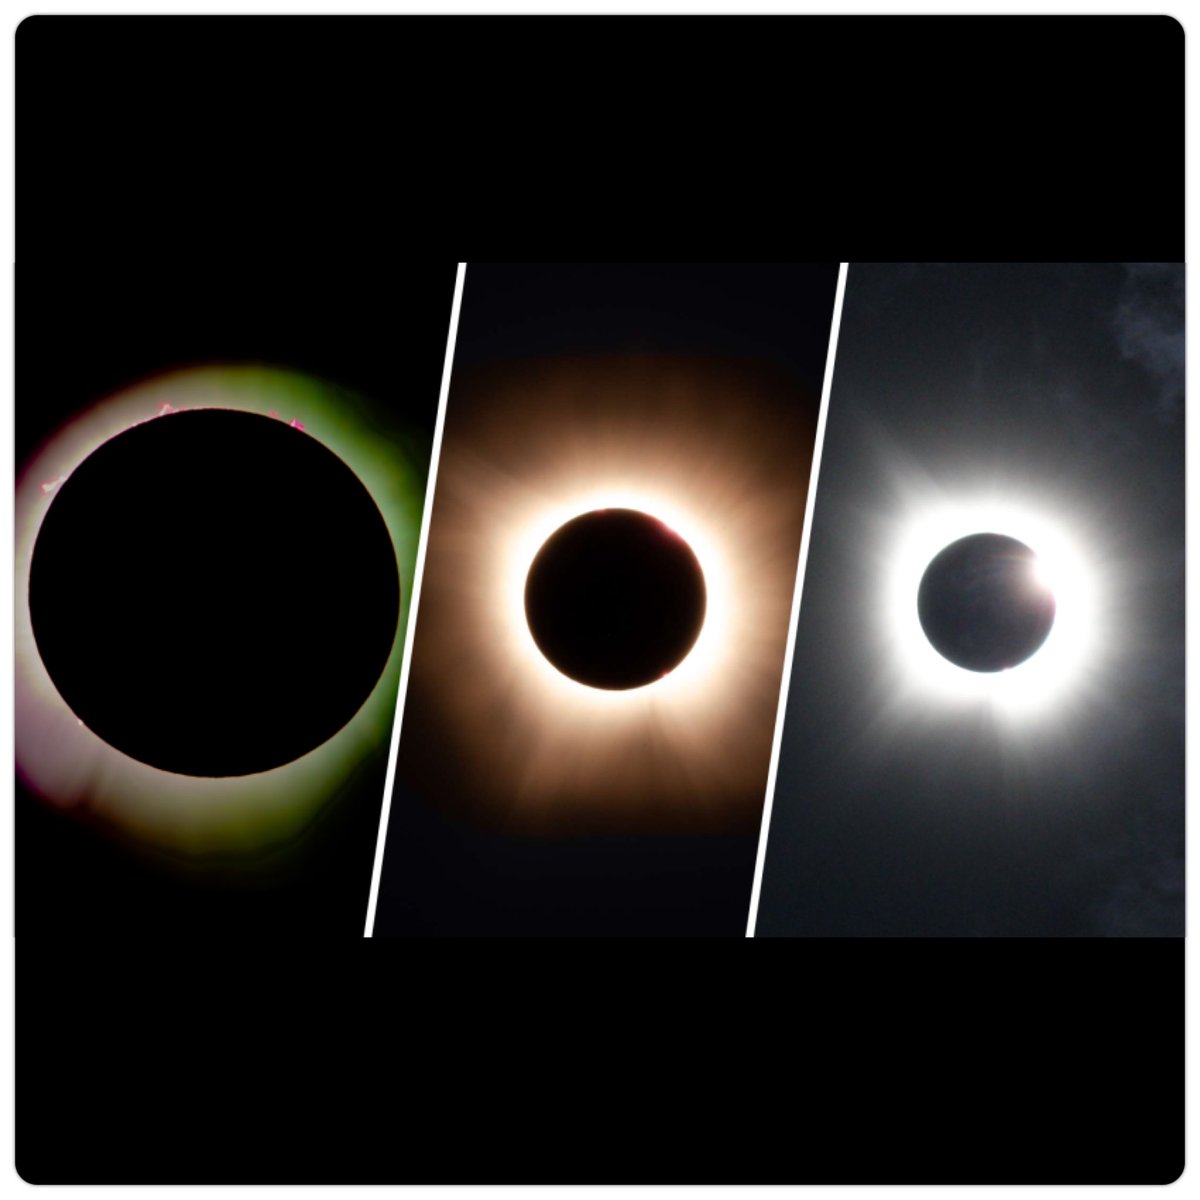 #SolarEclipse2024

I saw it! I survived it! It happened in Fort Worth, April 8, 2024. My thoughts: seeing the glow, shadow, Jupiter & Venus in the daytime was amazing to witness. God is an awesome God. 

#drtarareed #ONEPEARLMOVEMENT #reedwithpurpose #godgrowthglory #eclipse2024